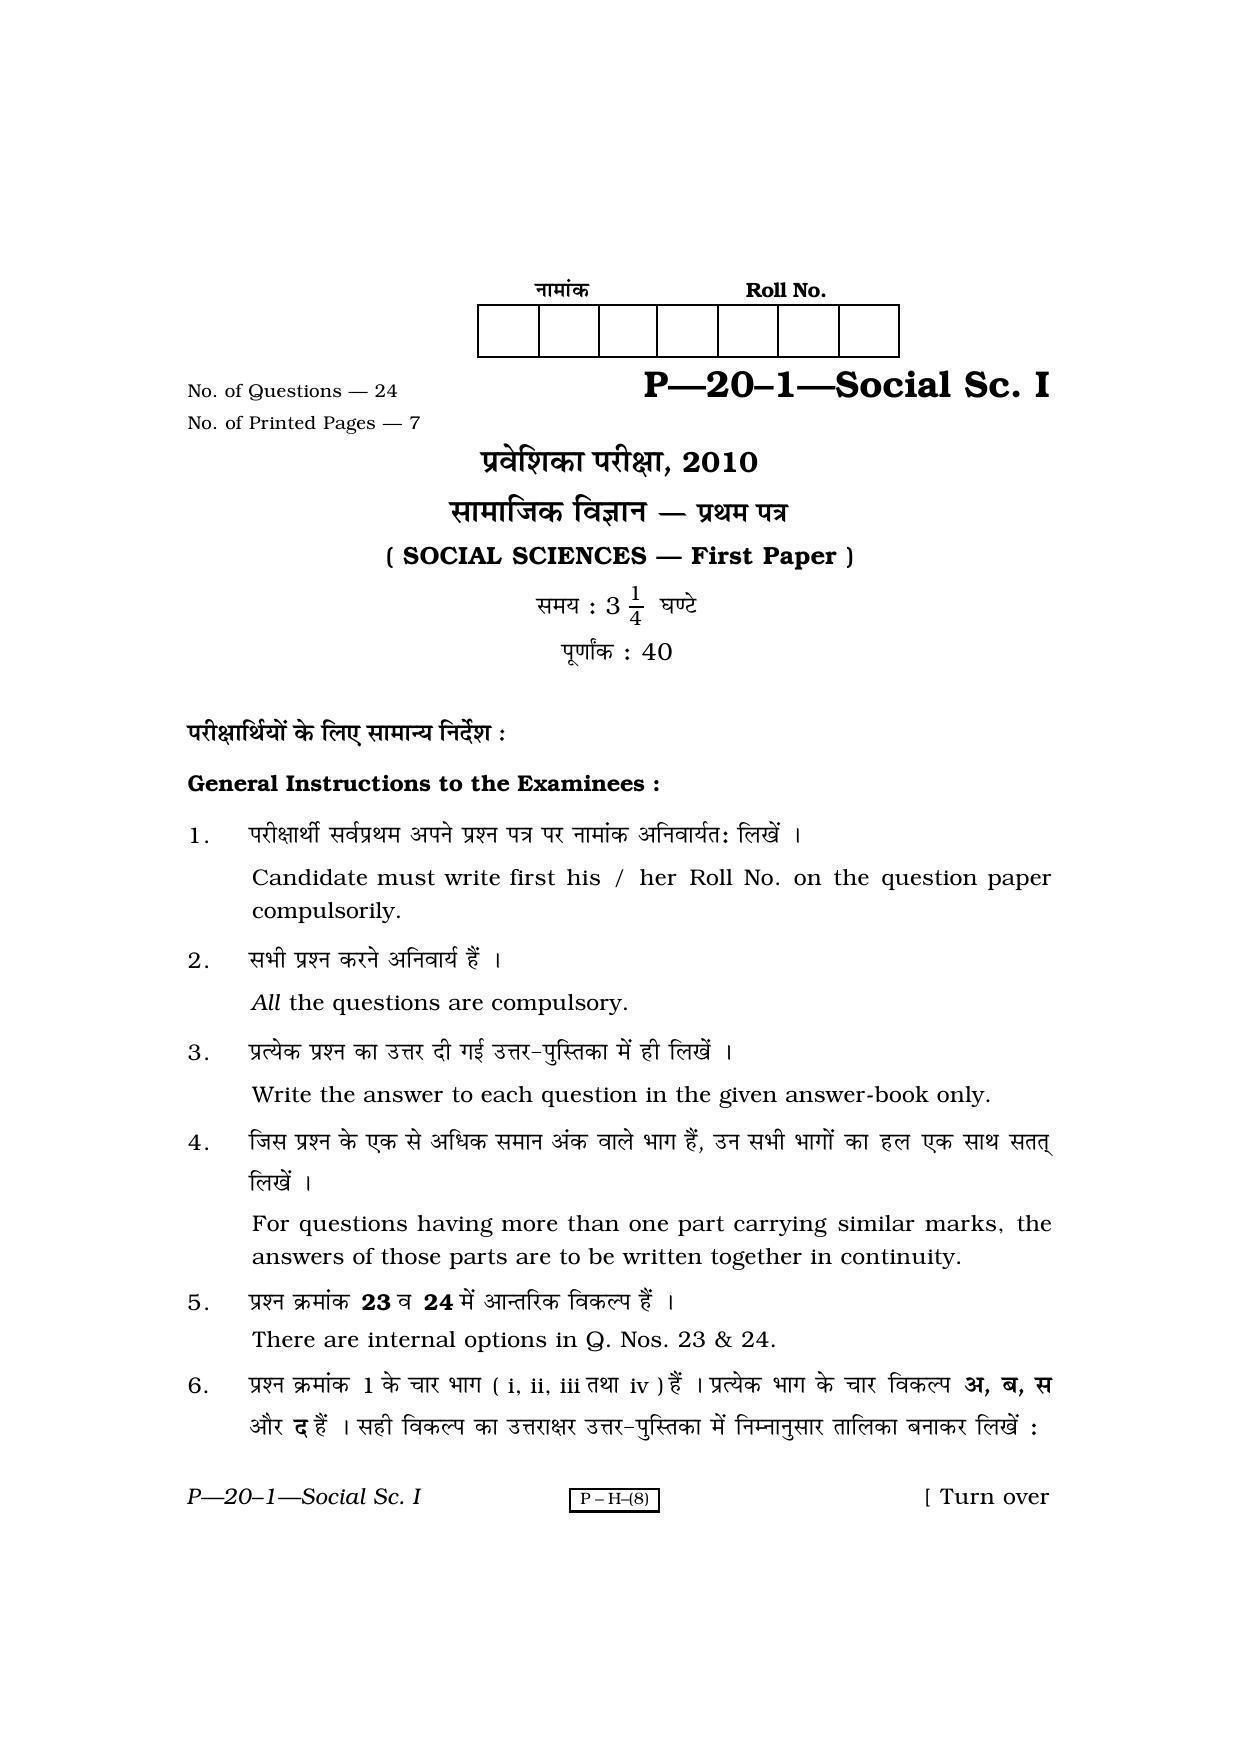 RBSE 2010 Social Science I Praveshika Question Paper - Page 1